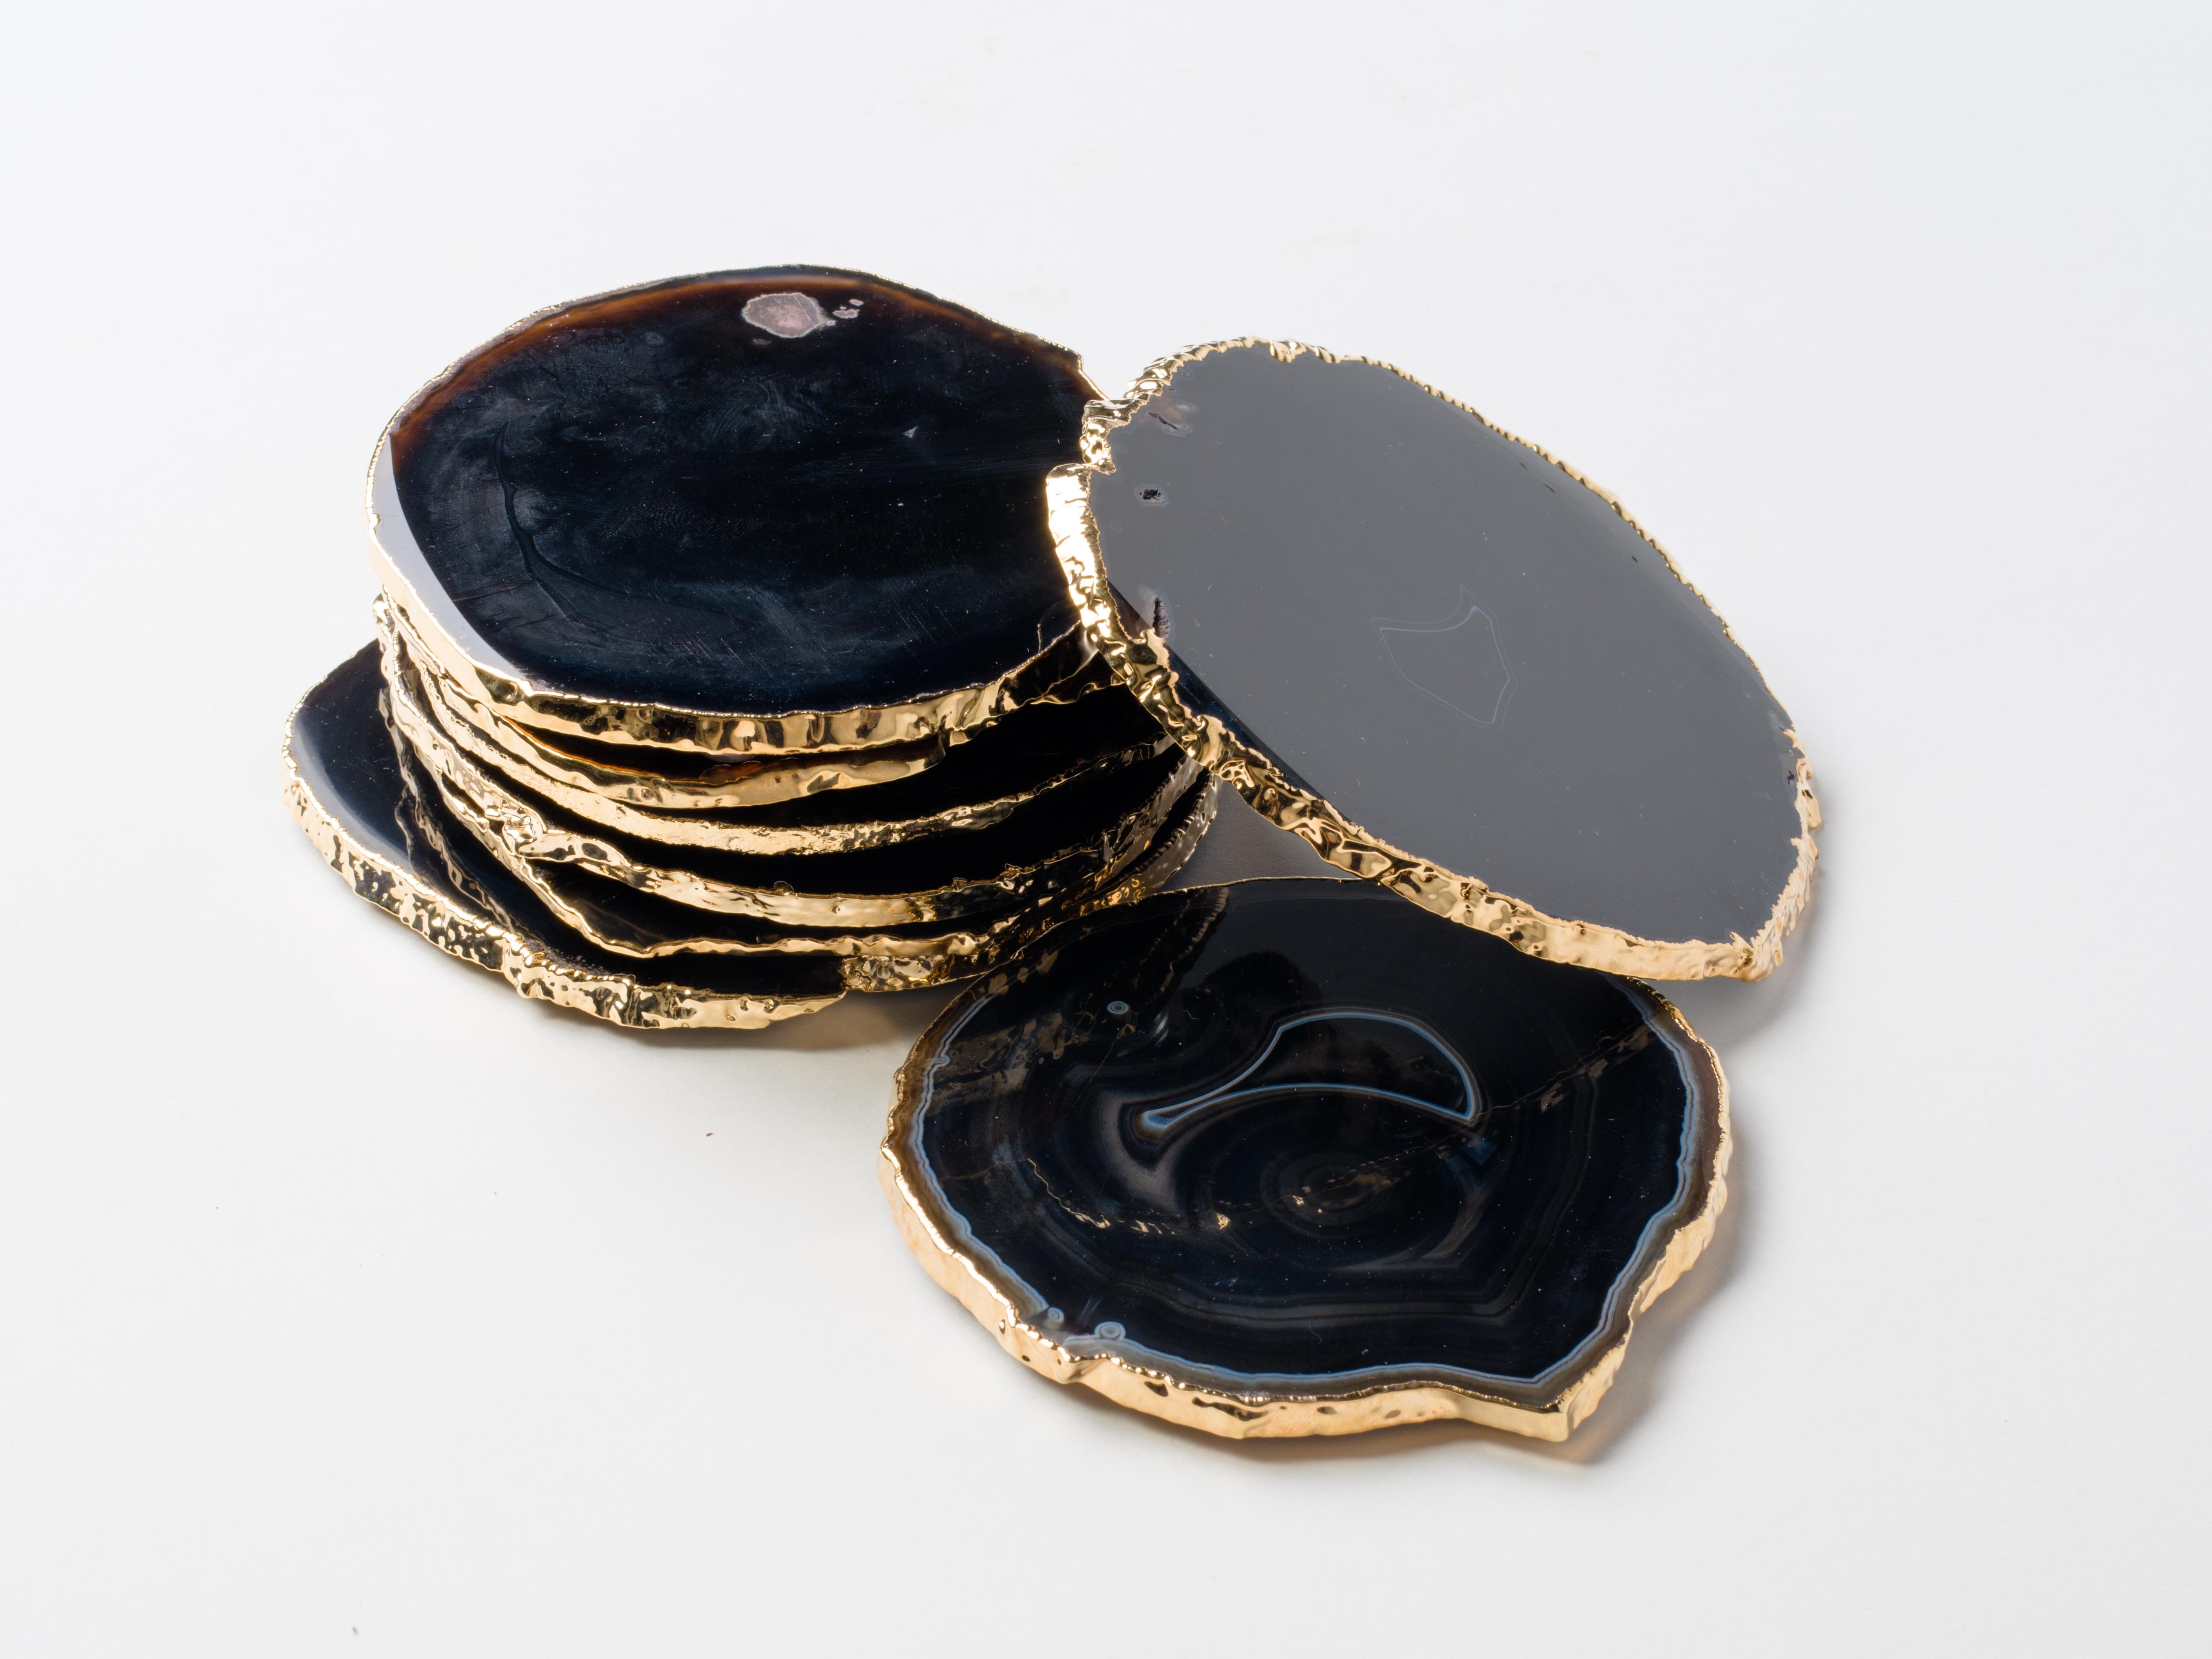 Stunning natural agate and crystal coasters in black onyx hues with 24-karat gold-plated edges. Polished fronts and natural rough edges. No two pieces are alike. Make beautiful accessories to any coffee table or dining table setting. Three color